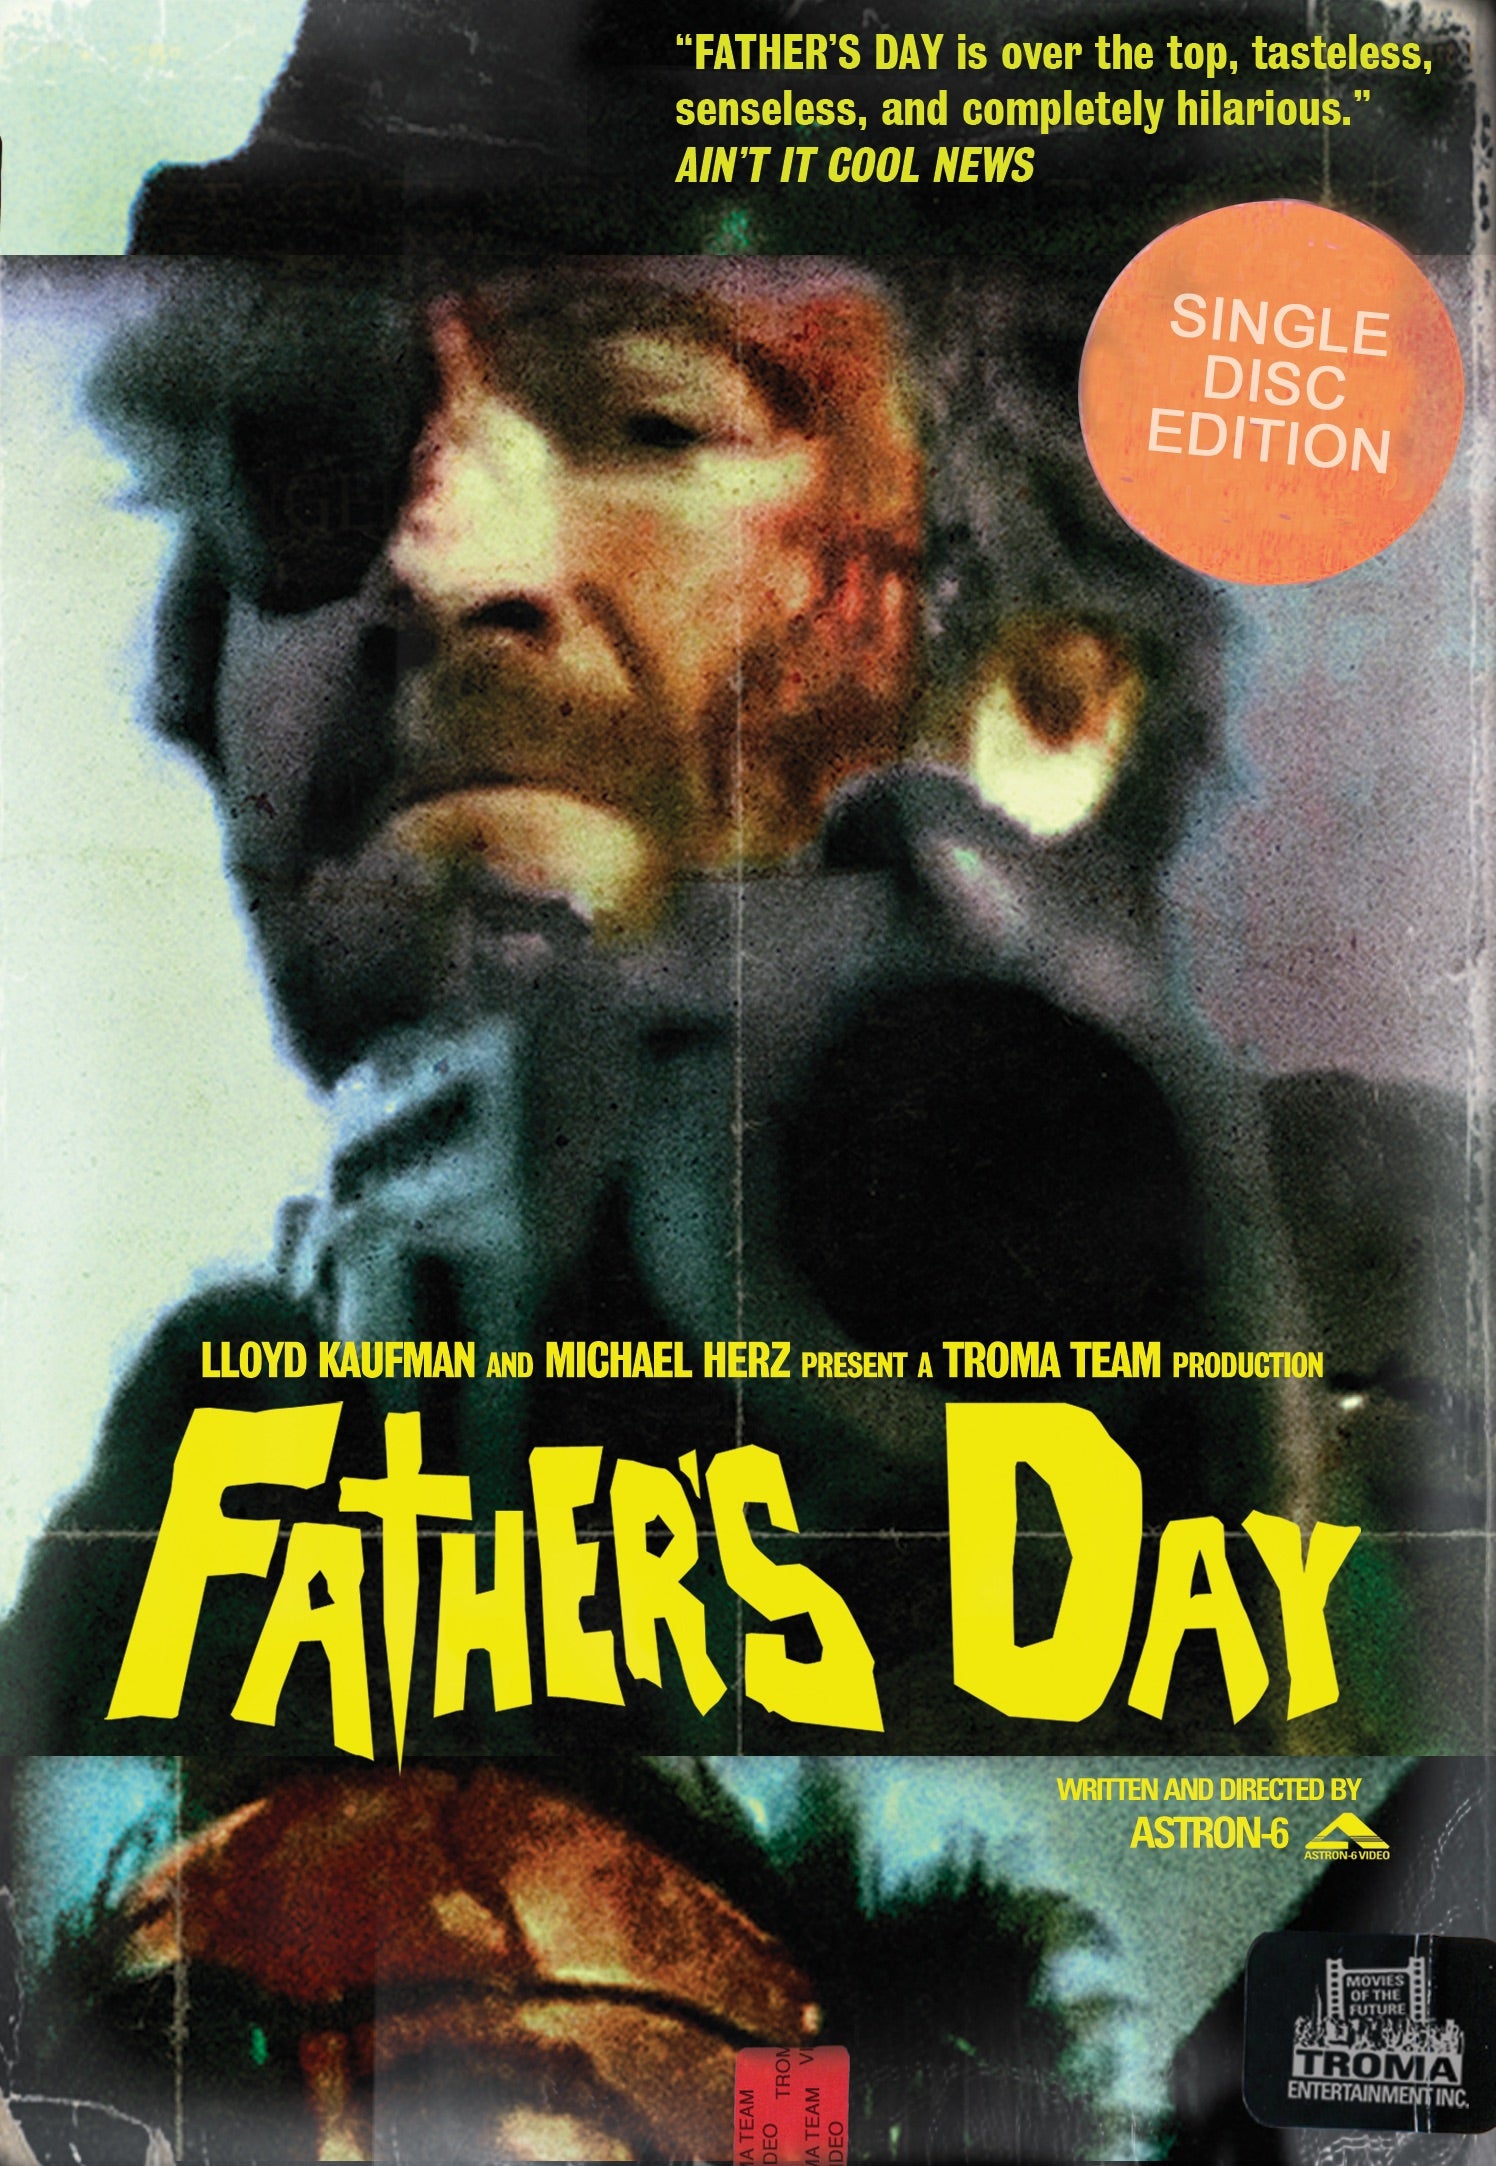 FATHER'S DAY DVD